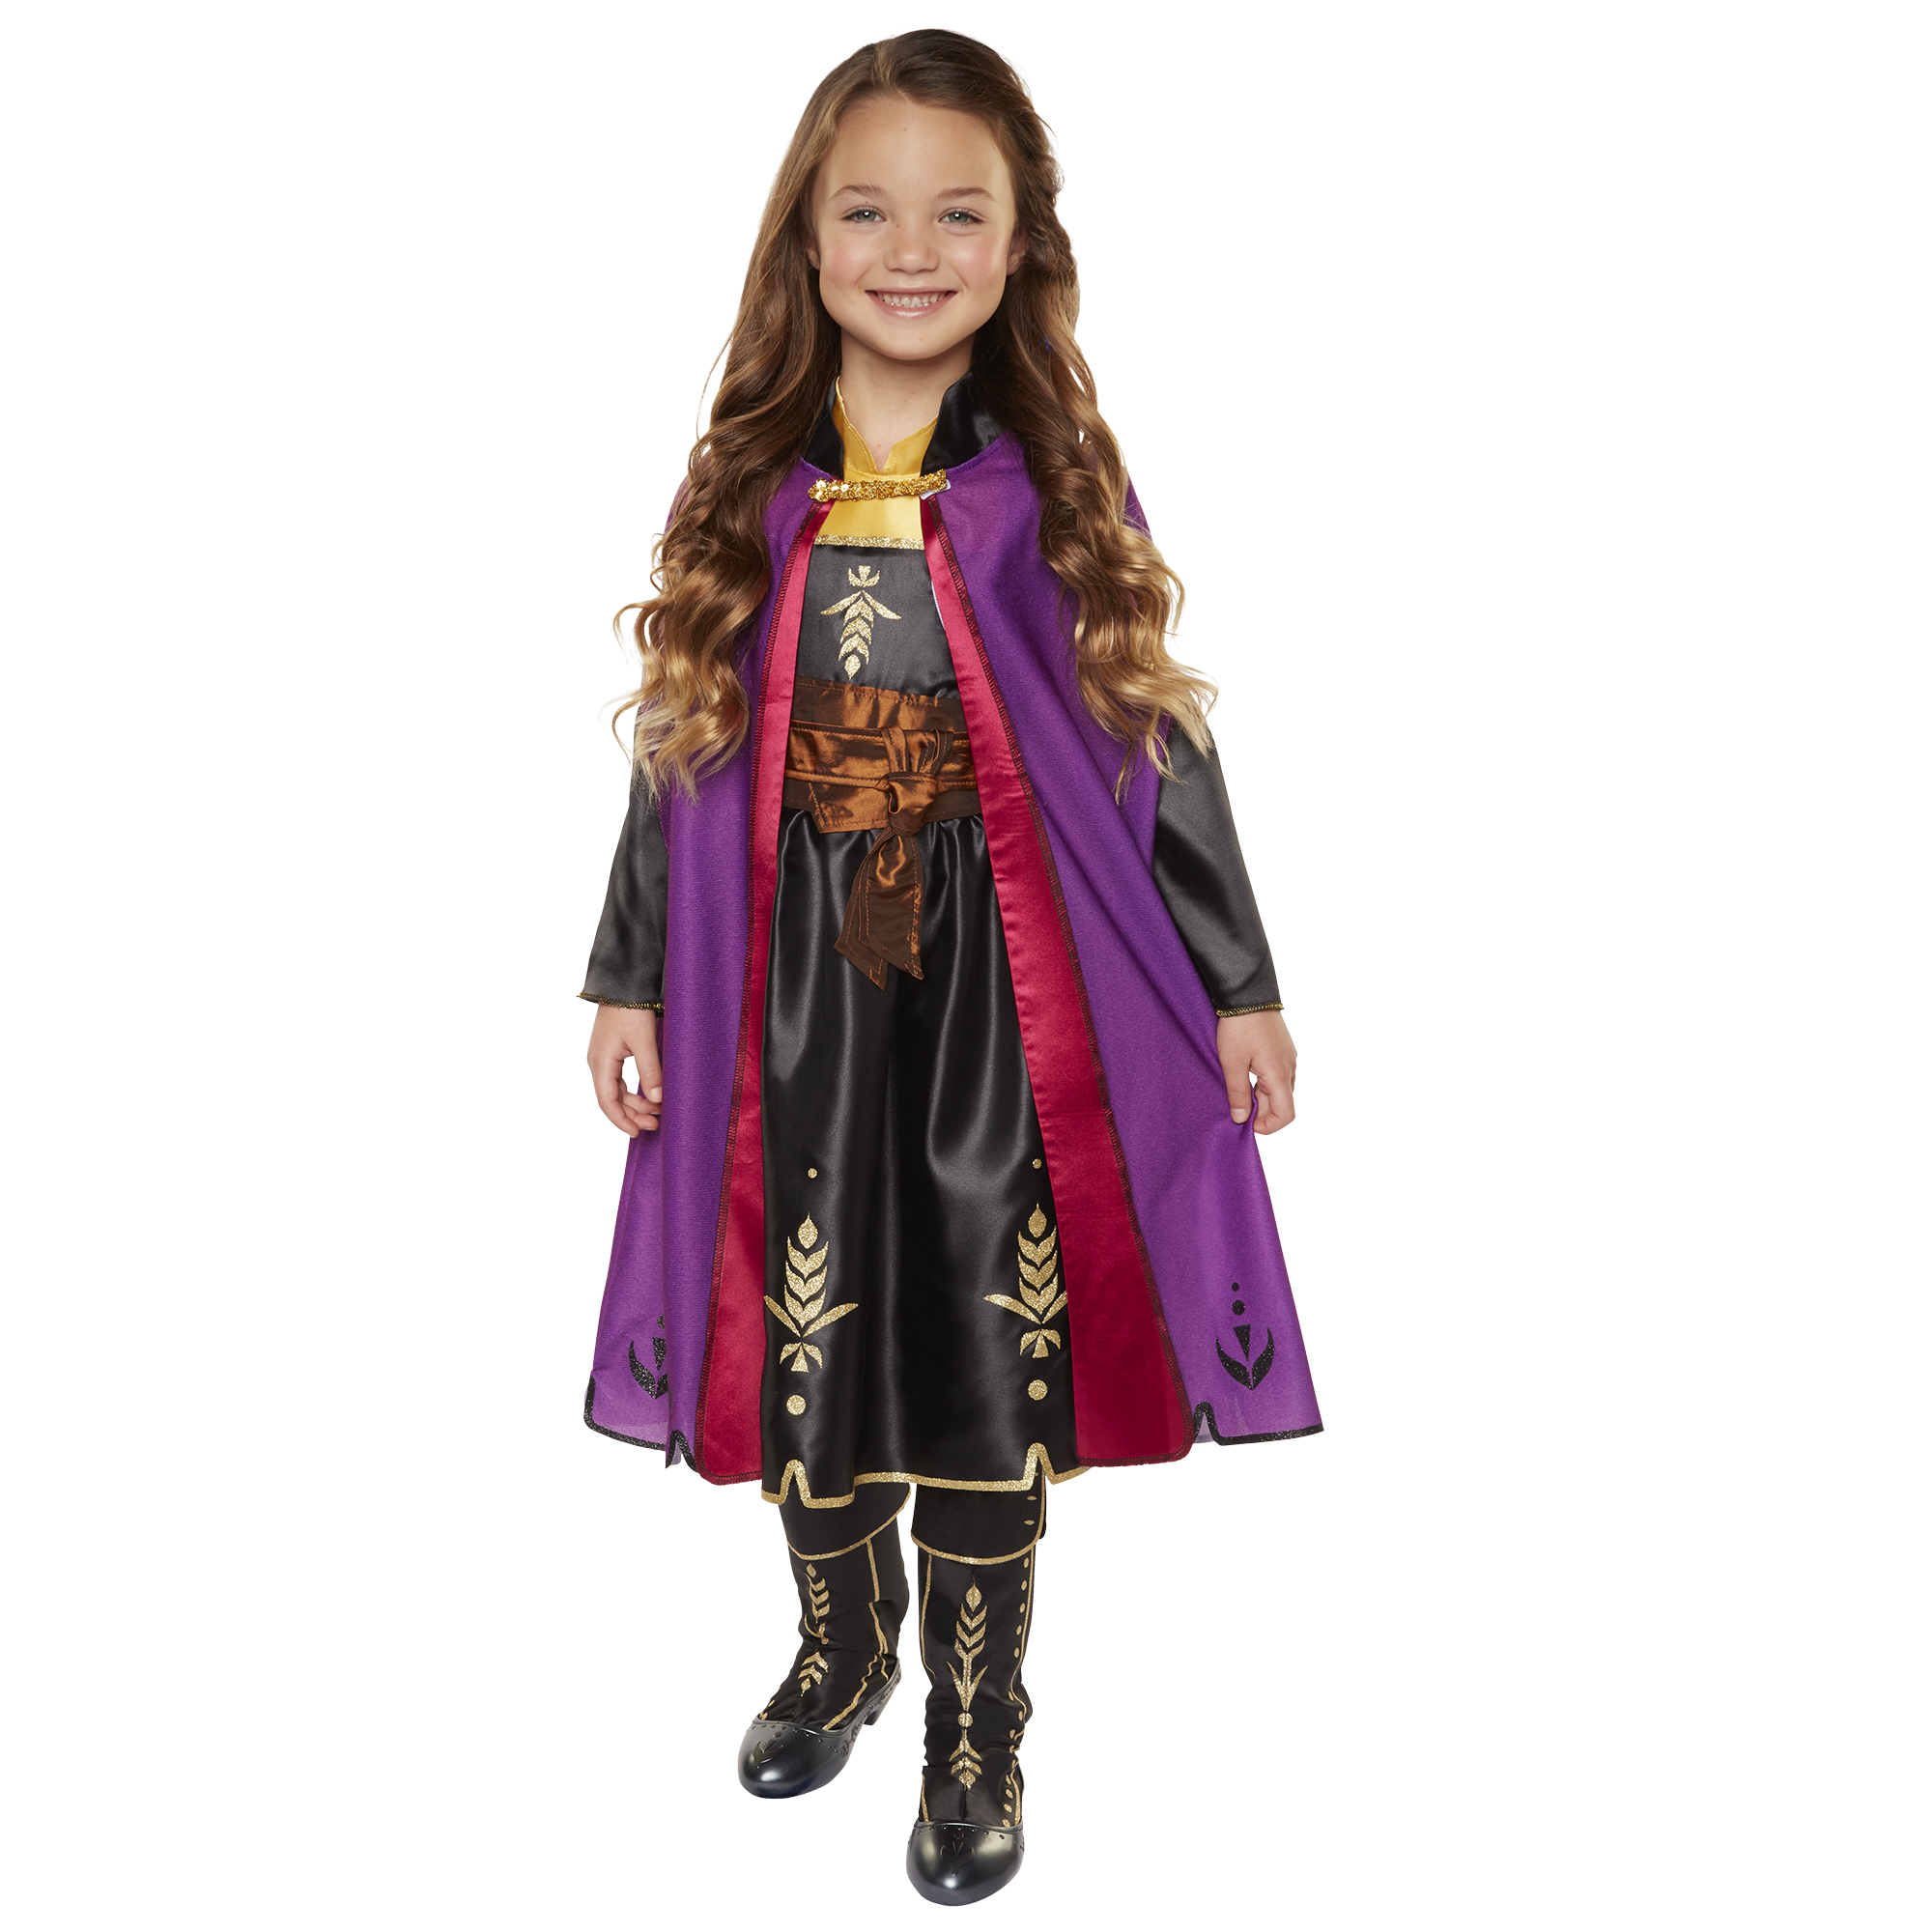 Frozen 2 Princess Anna Travel Girl's Everyday Fancy-Dress Costume, S (4-6) - image 1 of 9